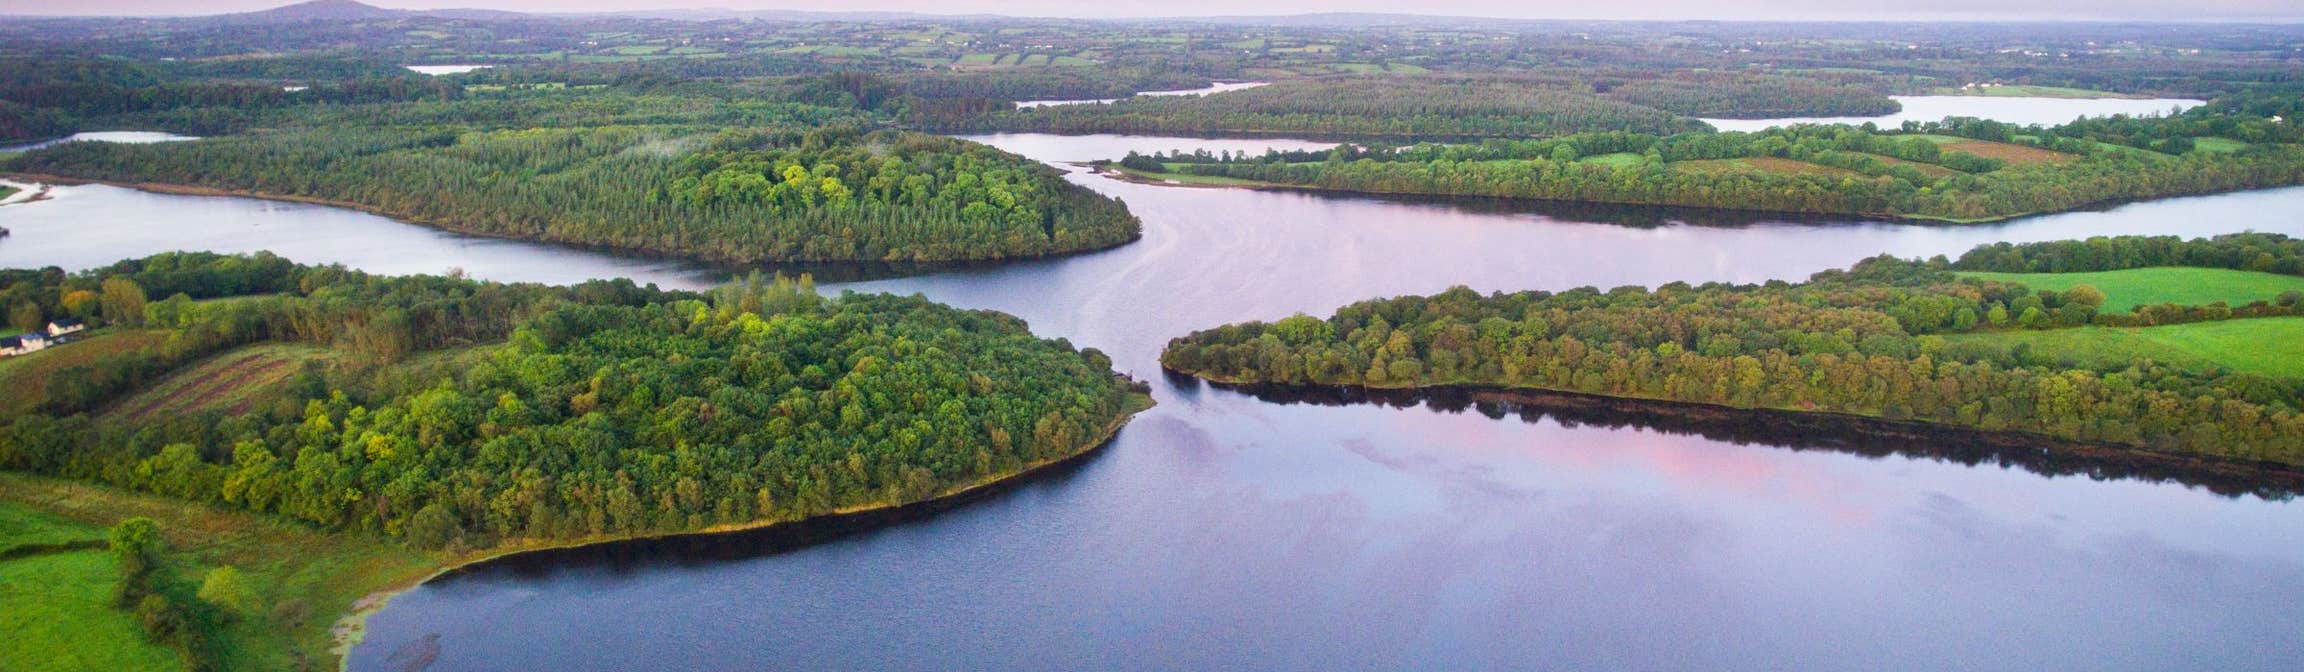 Image of Cloughoughter Castle in County Cavan